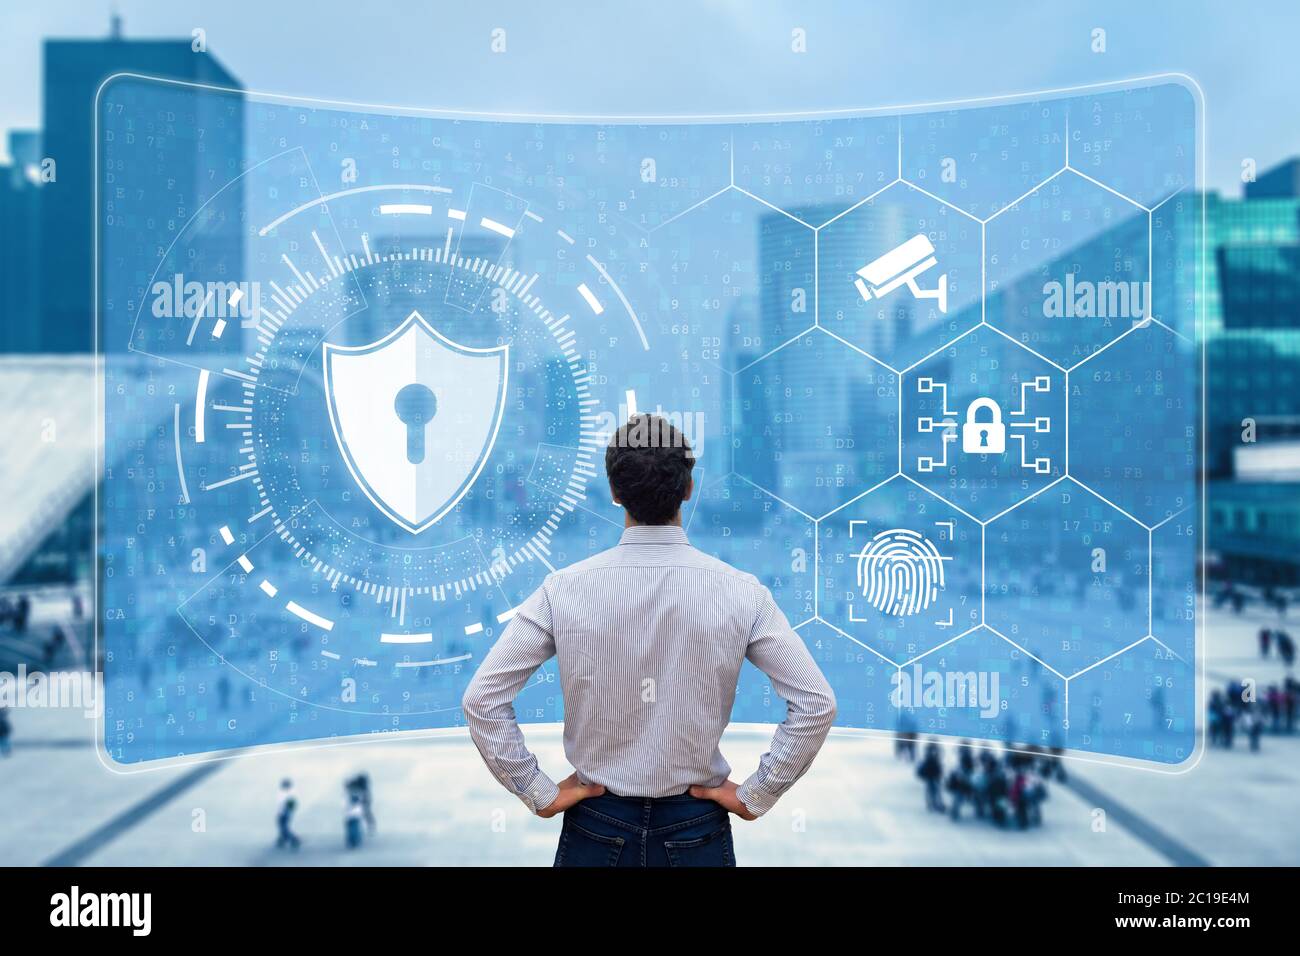 Cyber security and network protection. Cybersecurity expert working with secure access on internet. Concept with icons on screen and office buildings Stock Photo